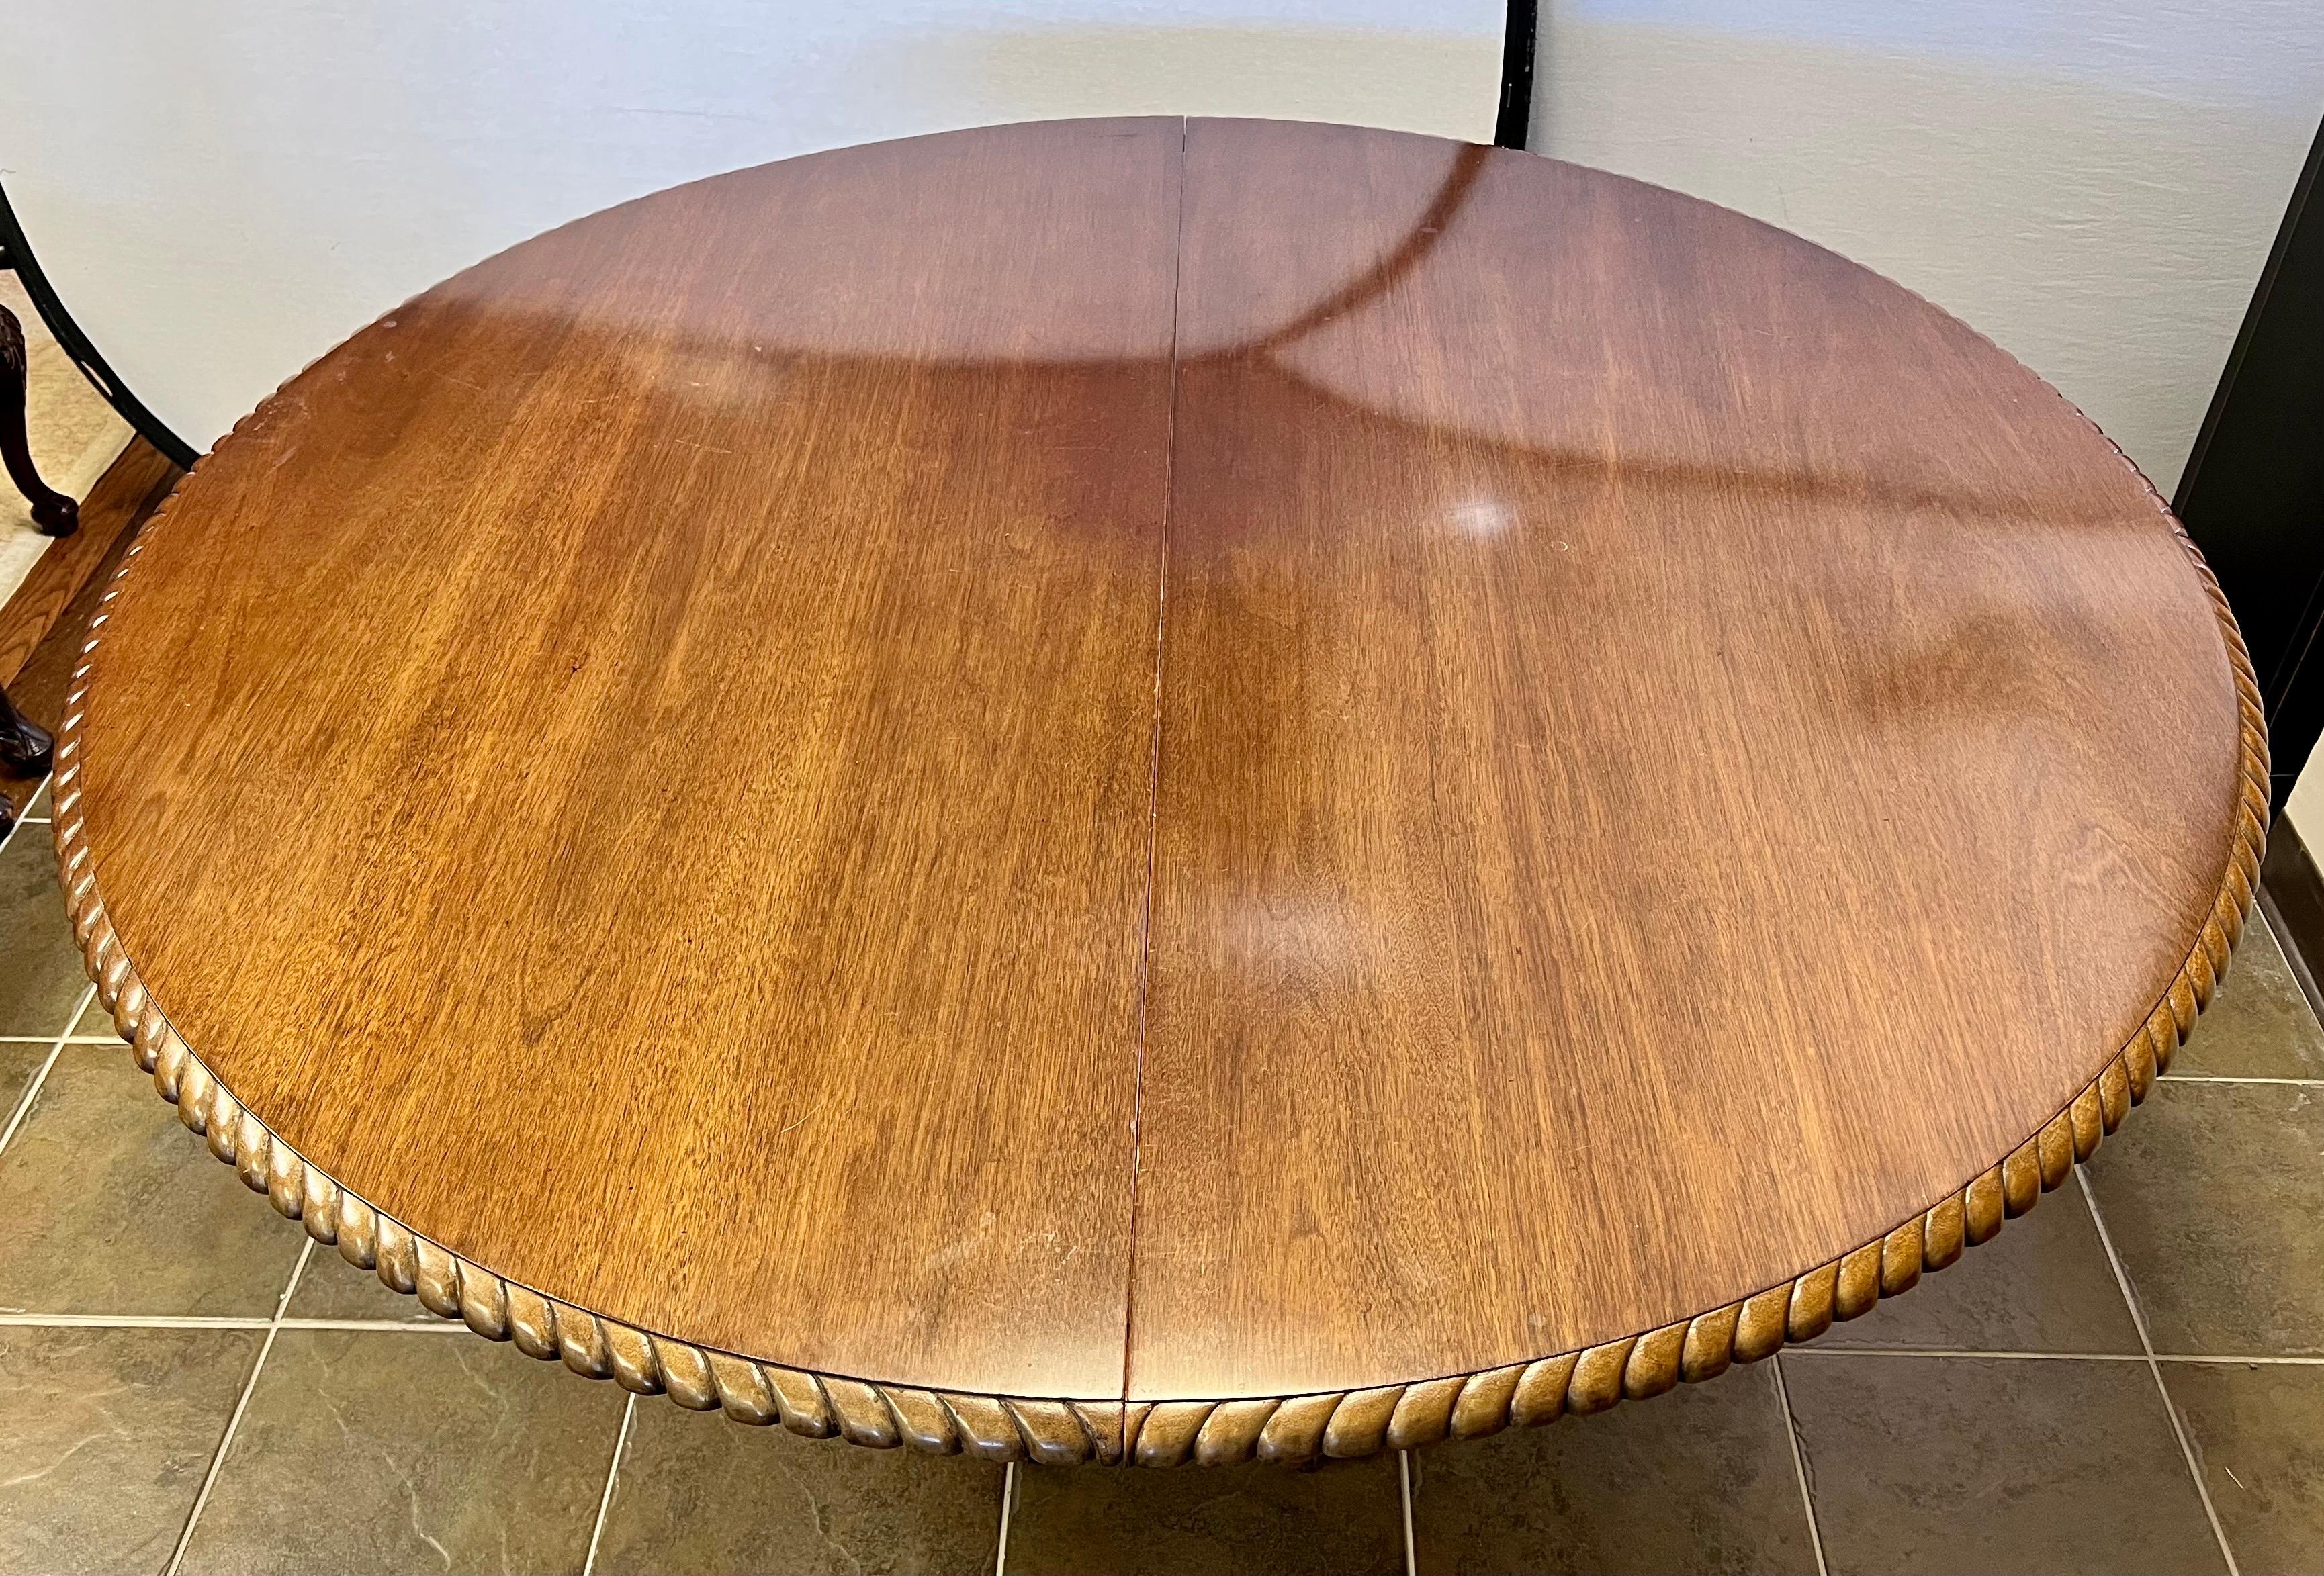 Rare, high quality mahogany dining table painstakingly handcrafted by the Nathan Margolis Shop of Hartford, CT during the early part of the 20th century. It features carved edge detail and carved double pedestals terminating into ball and claw feet.